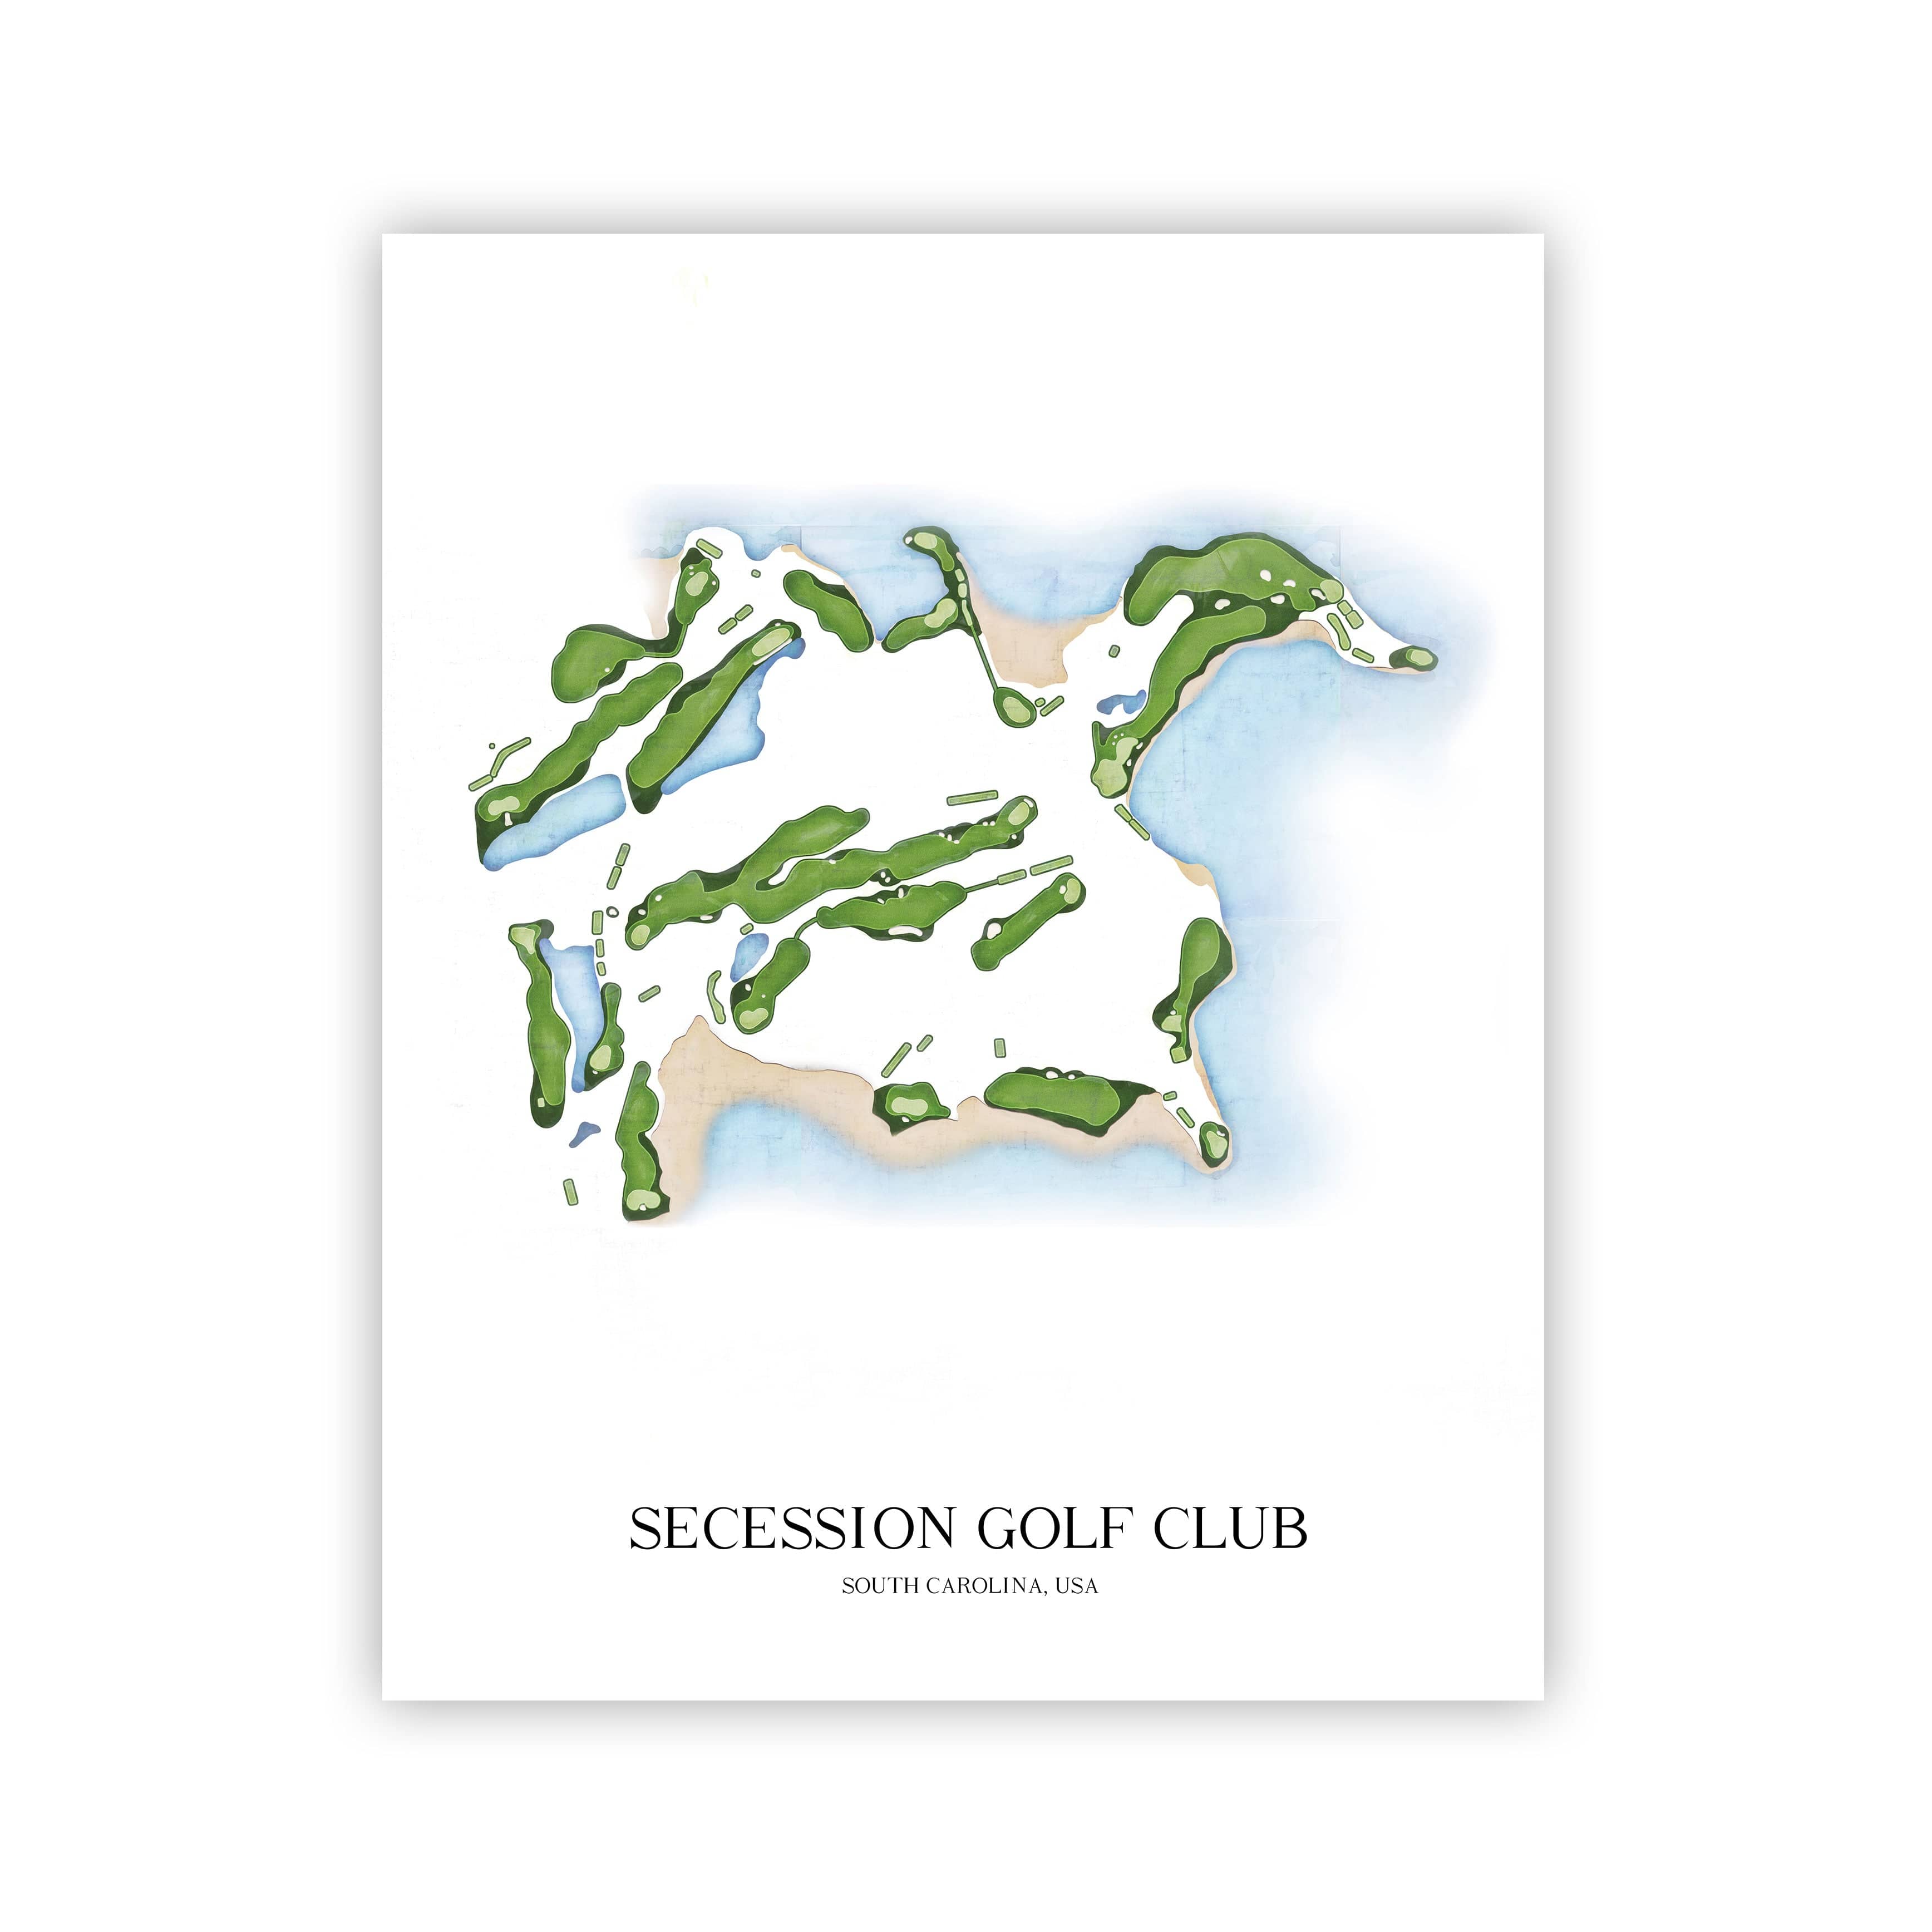 The 19th Hole Golf Shop - Golf Course Prints -  Secession Golf Club Golf Course Map